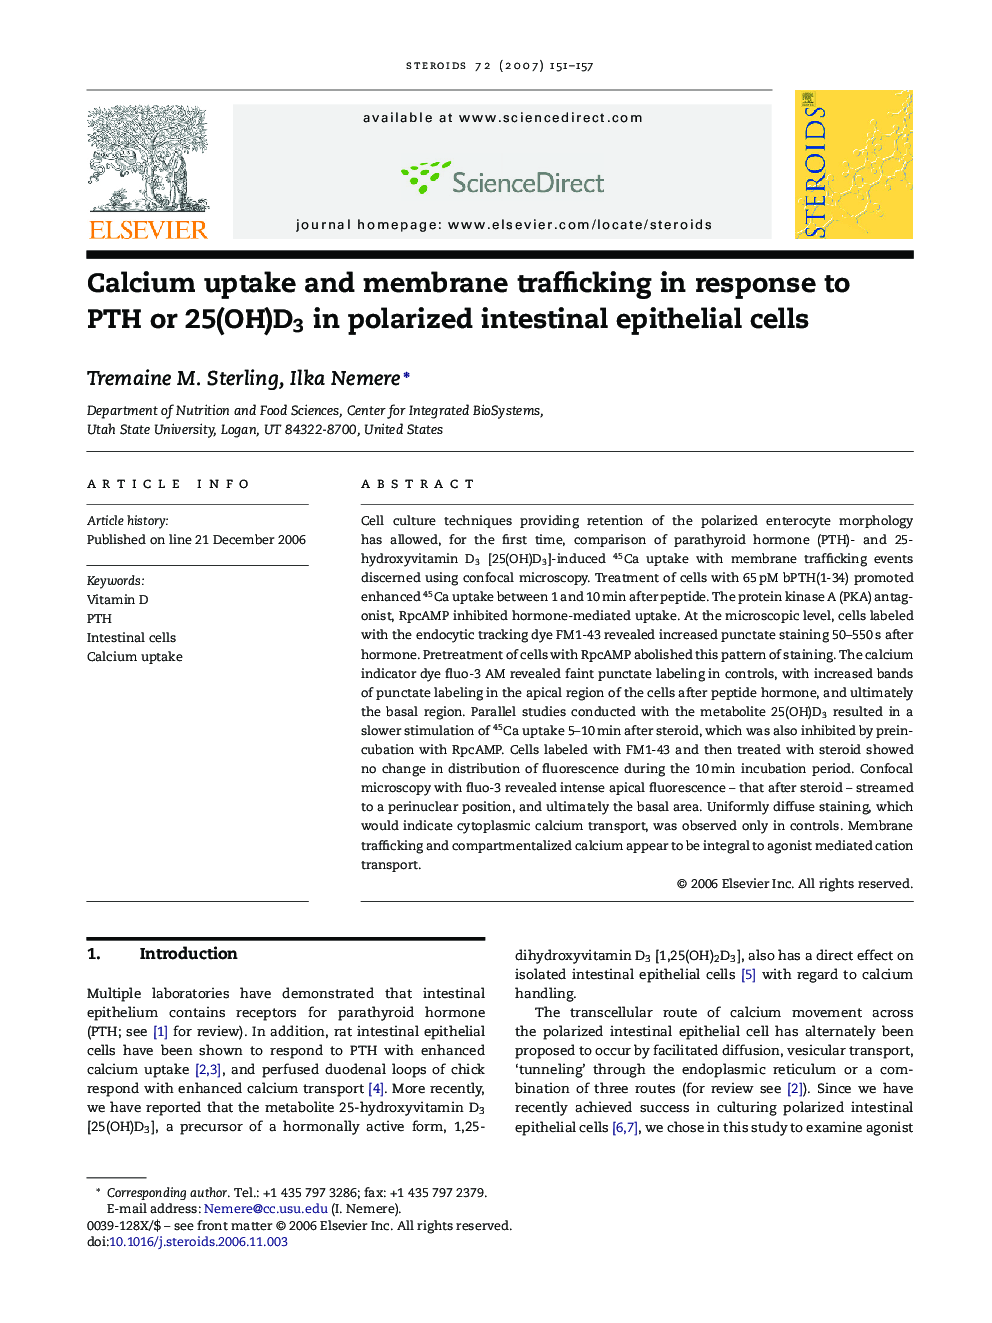 Calcium uptake and membrane trafficking in response to PTH or 25(OH)D3 in polarized intestinal epithelial cells